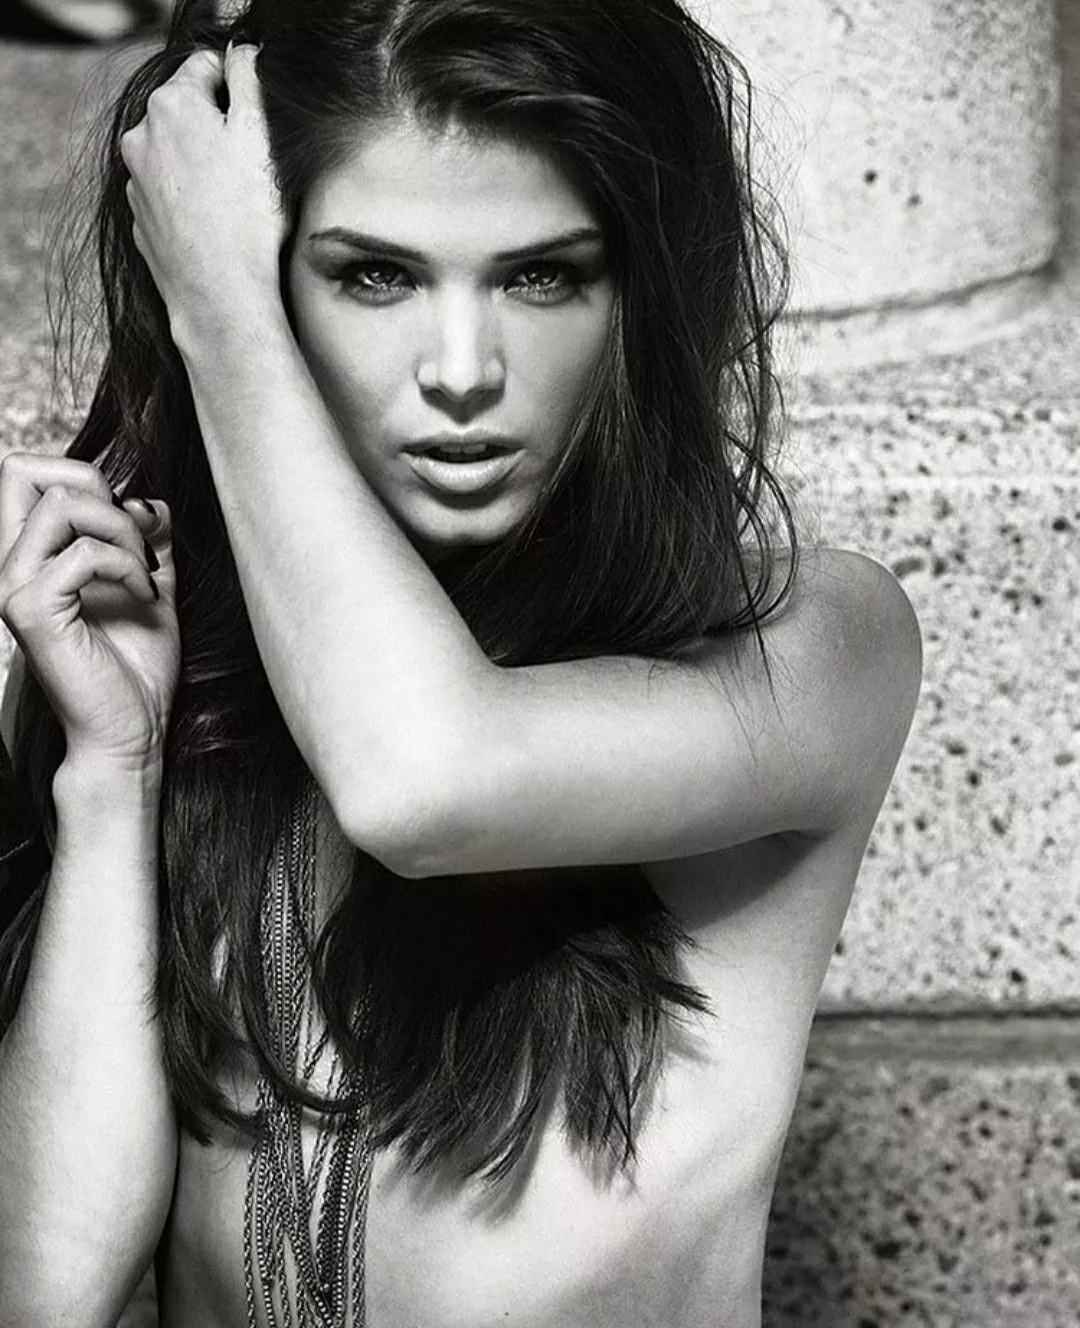 Marie avgeropoulos nude